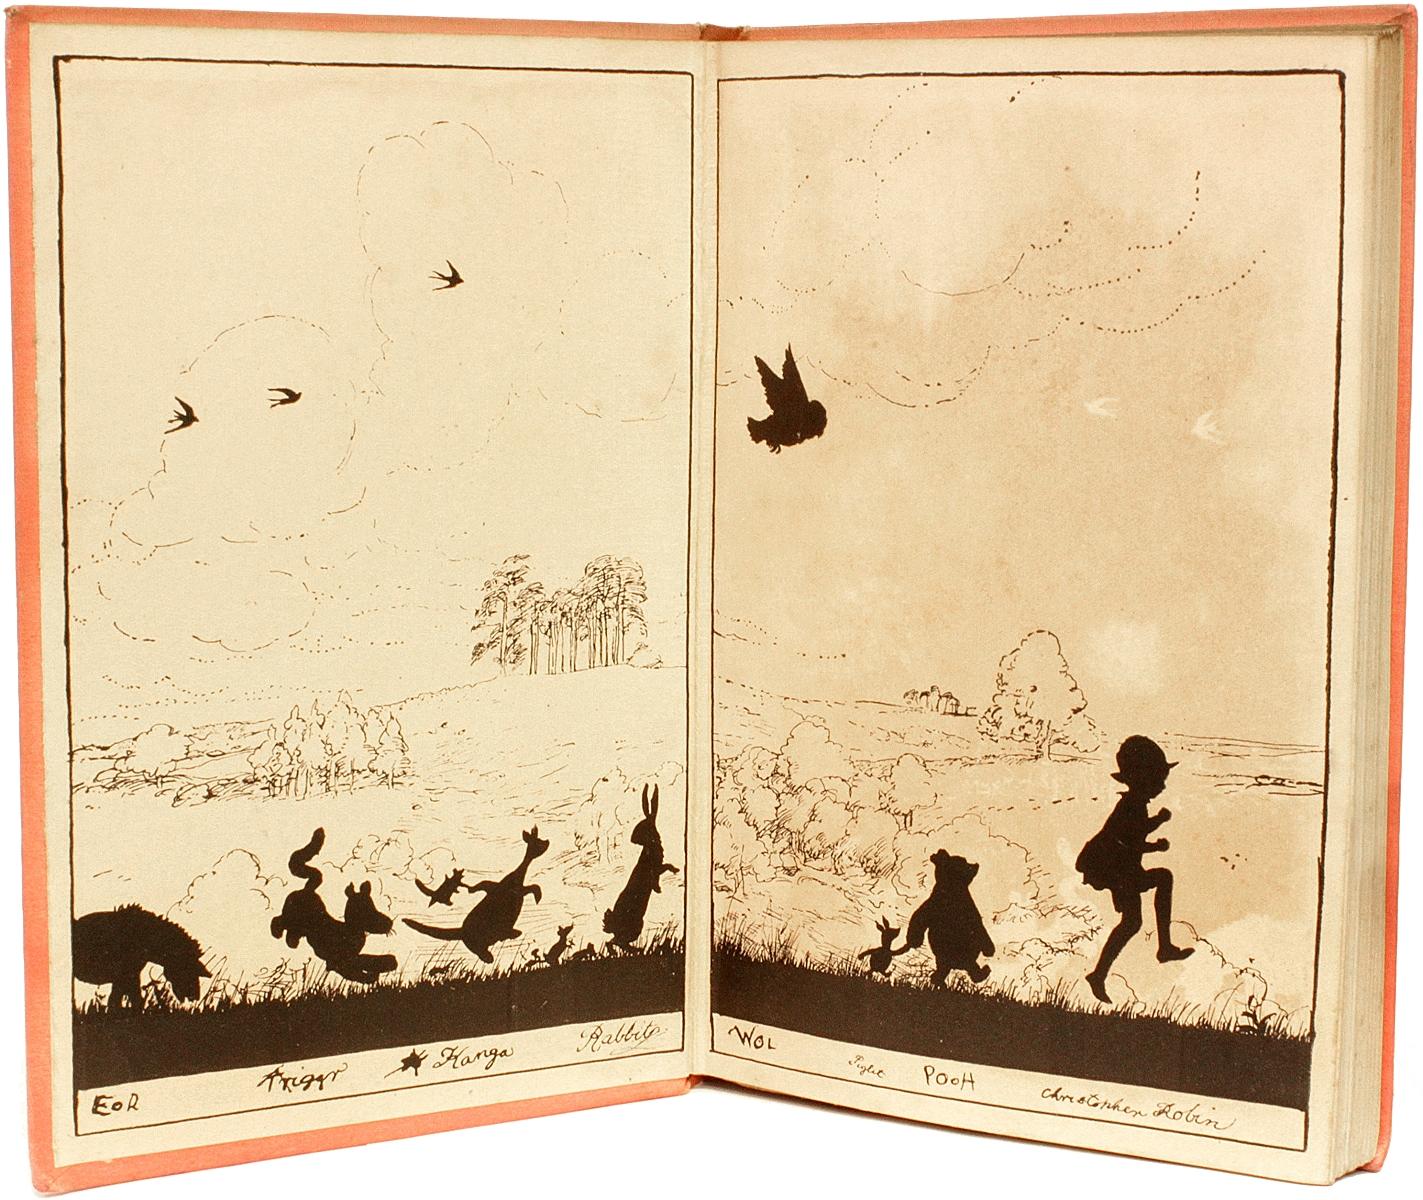 British Milne, A. A. the House at Pooh Corner, '1928, First Edition'